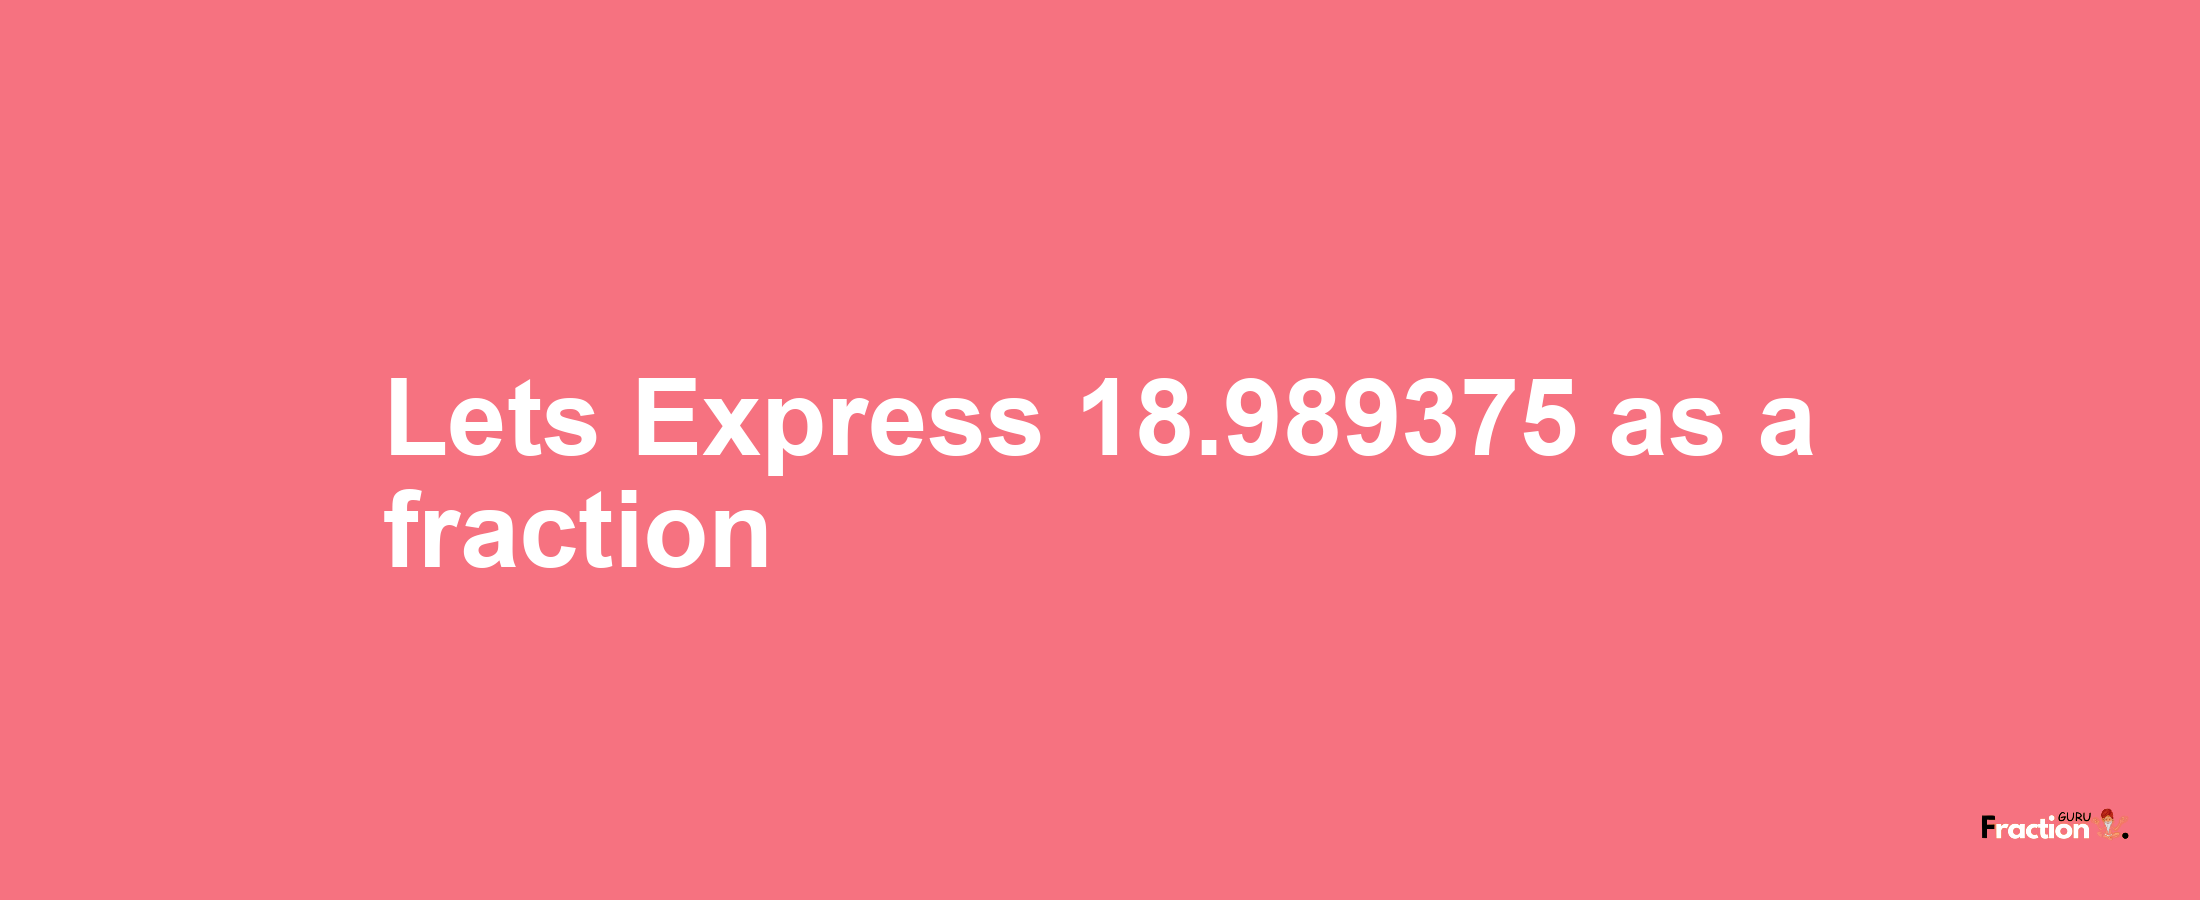 Lets Express 18.989375 as afraction